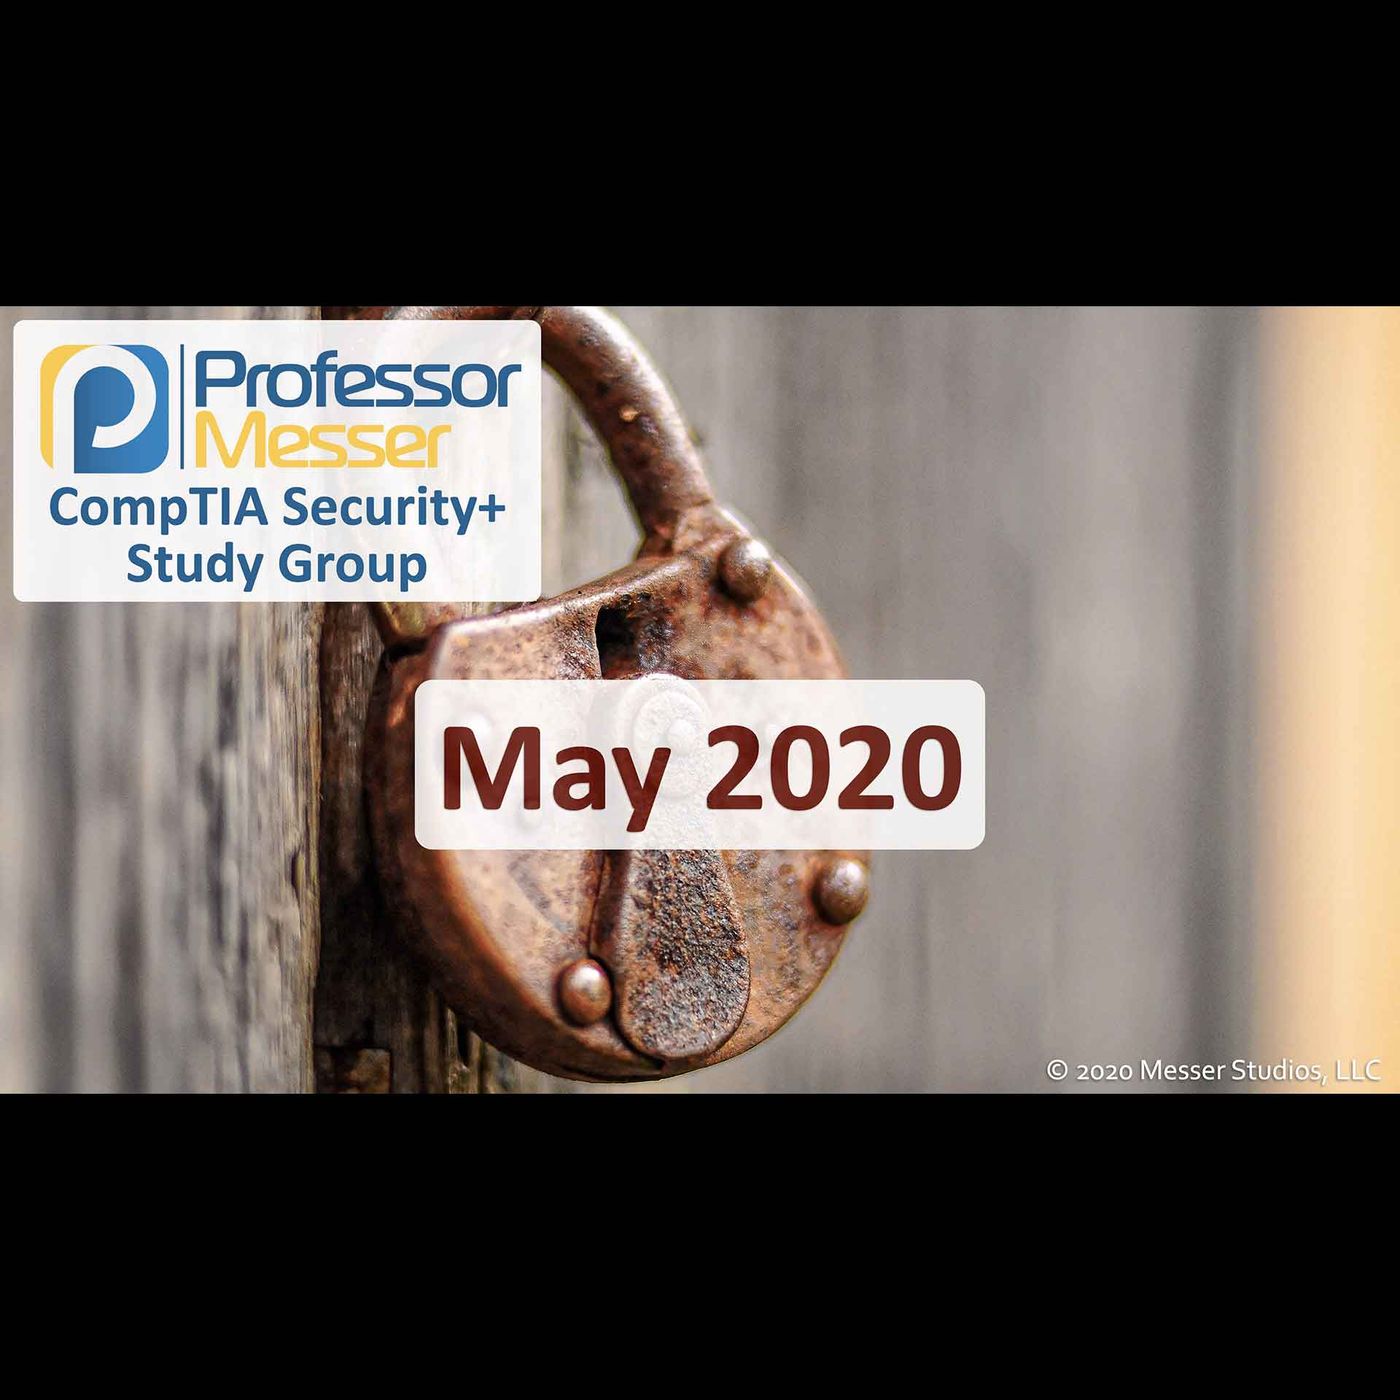 Professor Messer's Security+ Study Group After Show - May 2020